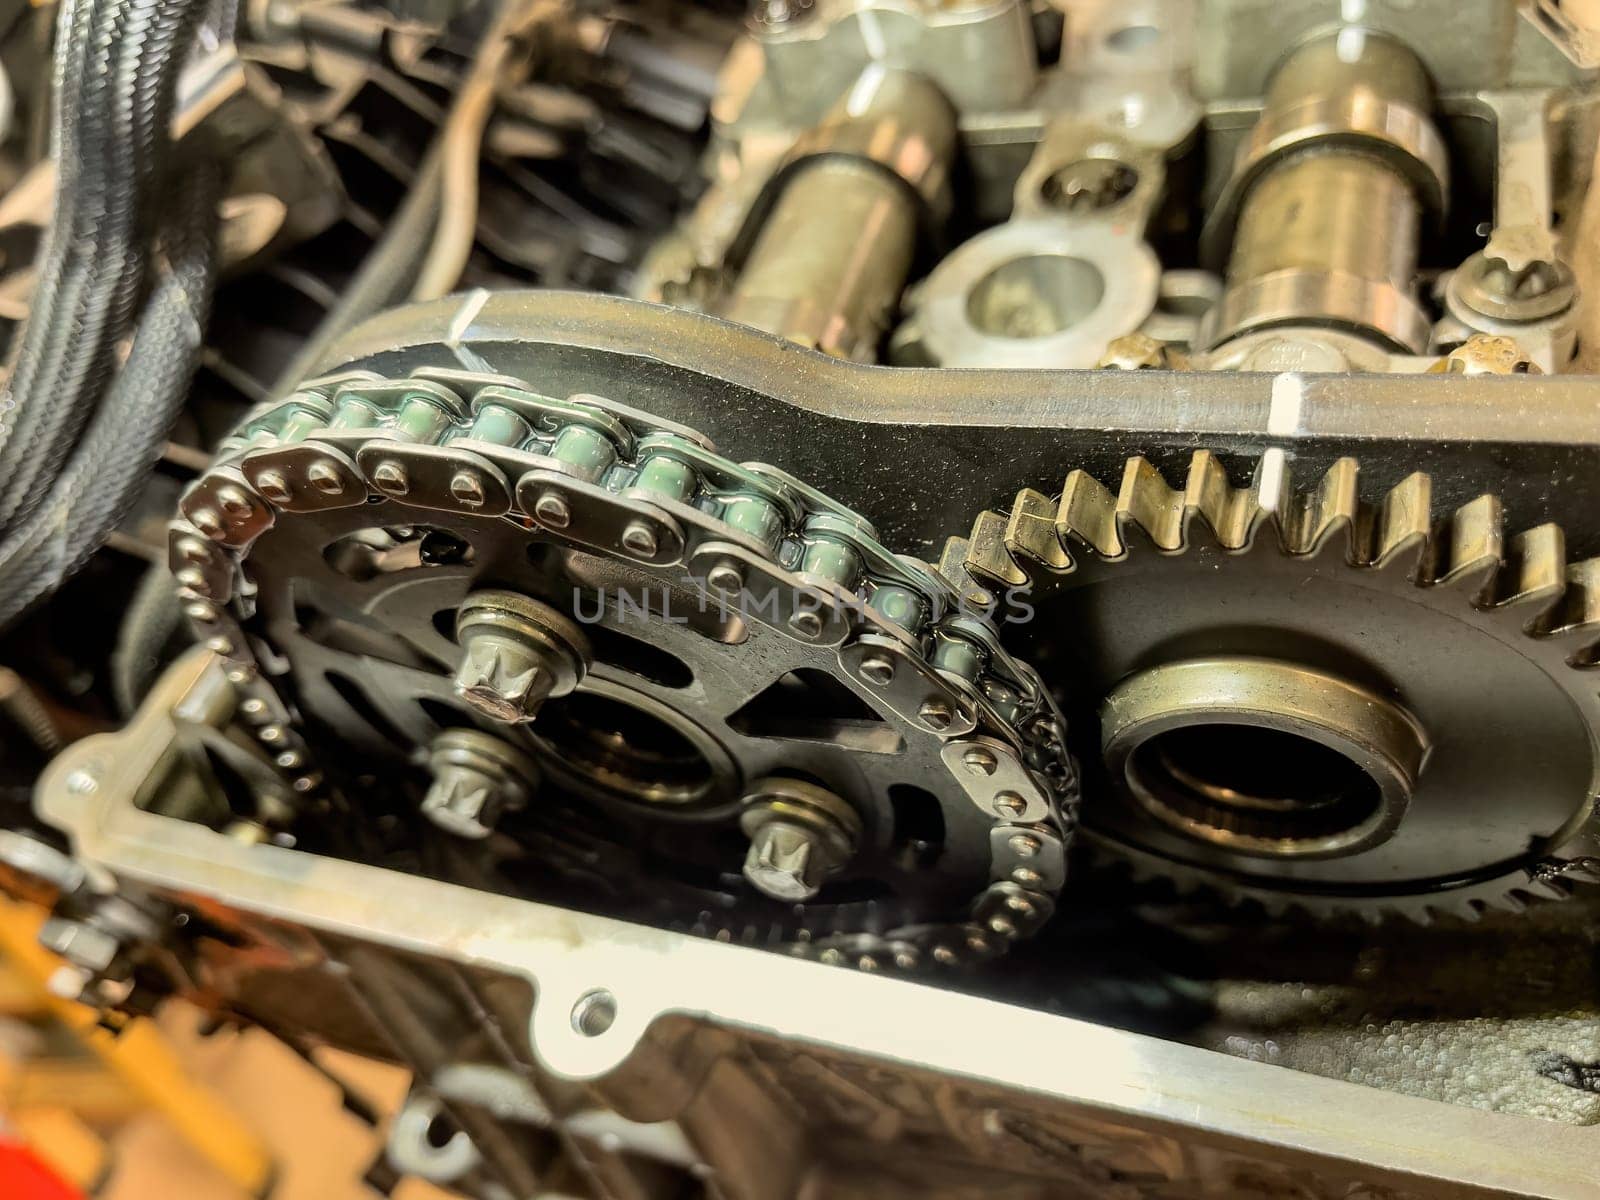 Detailed Timing Chain Car Engine by pippocarlot